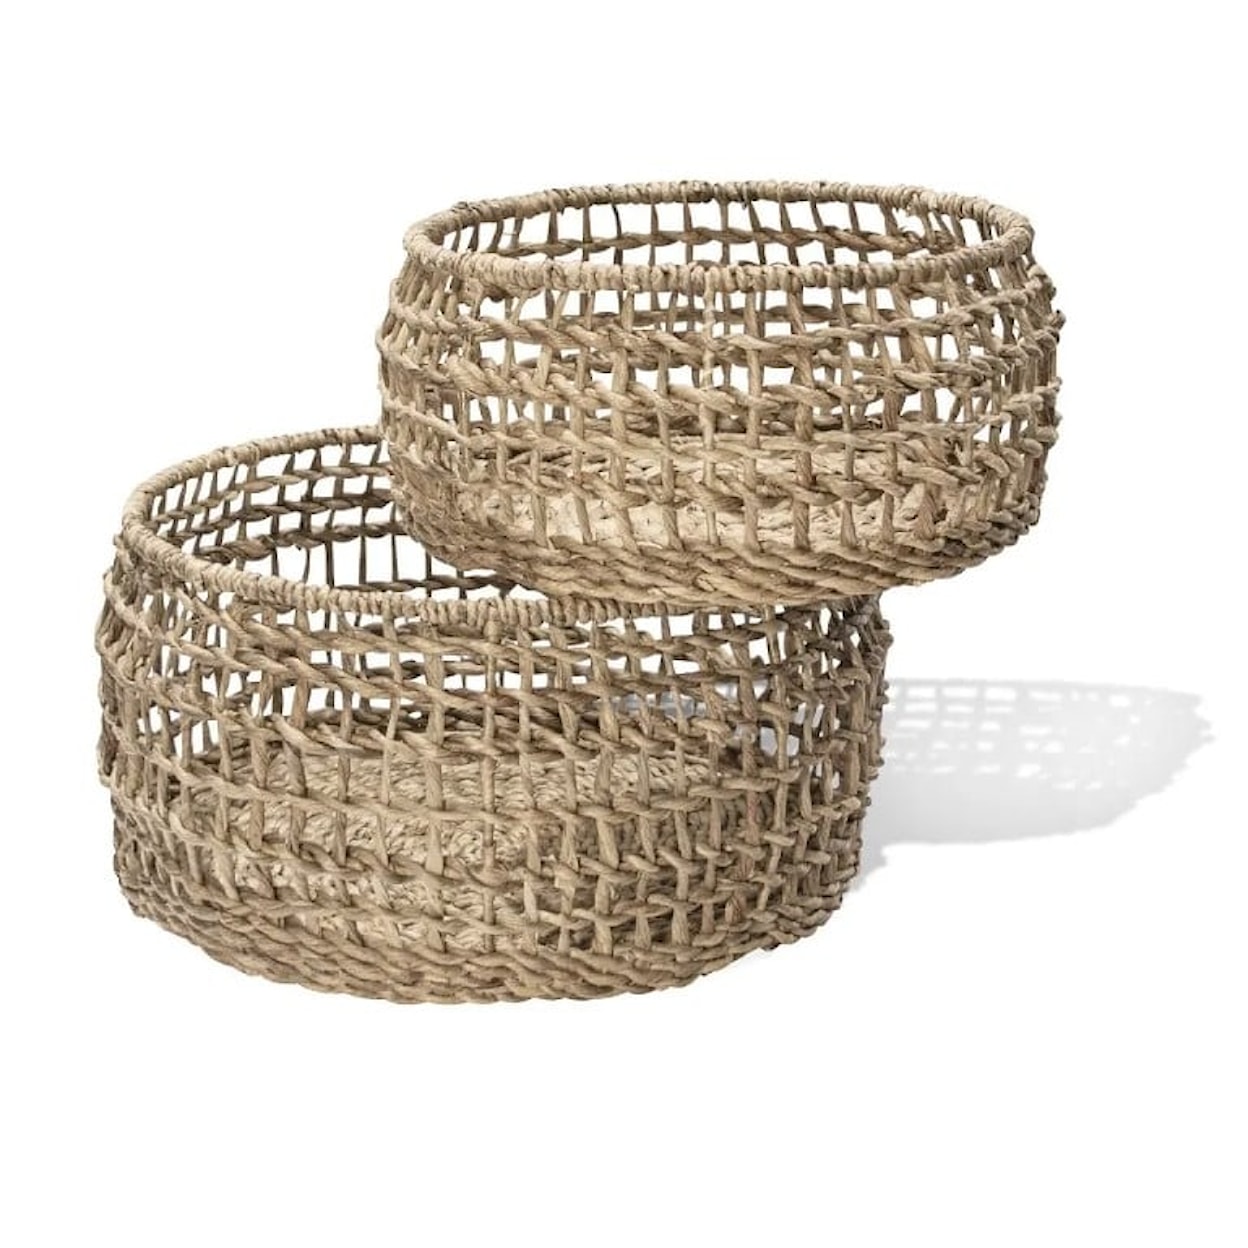 Ibolili Baskets and Sets SHIP KNOT TABLE BASKET, ROUND- S/2